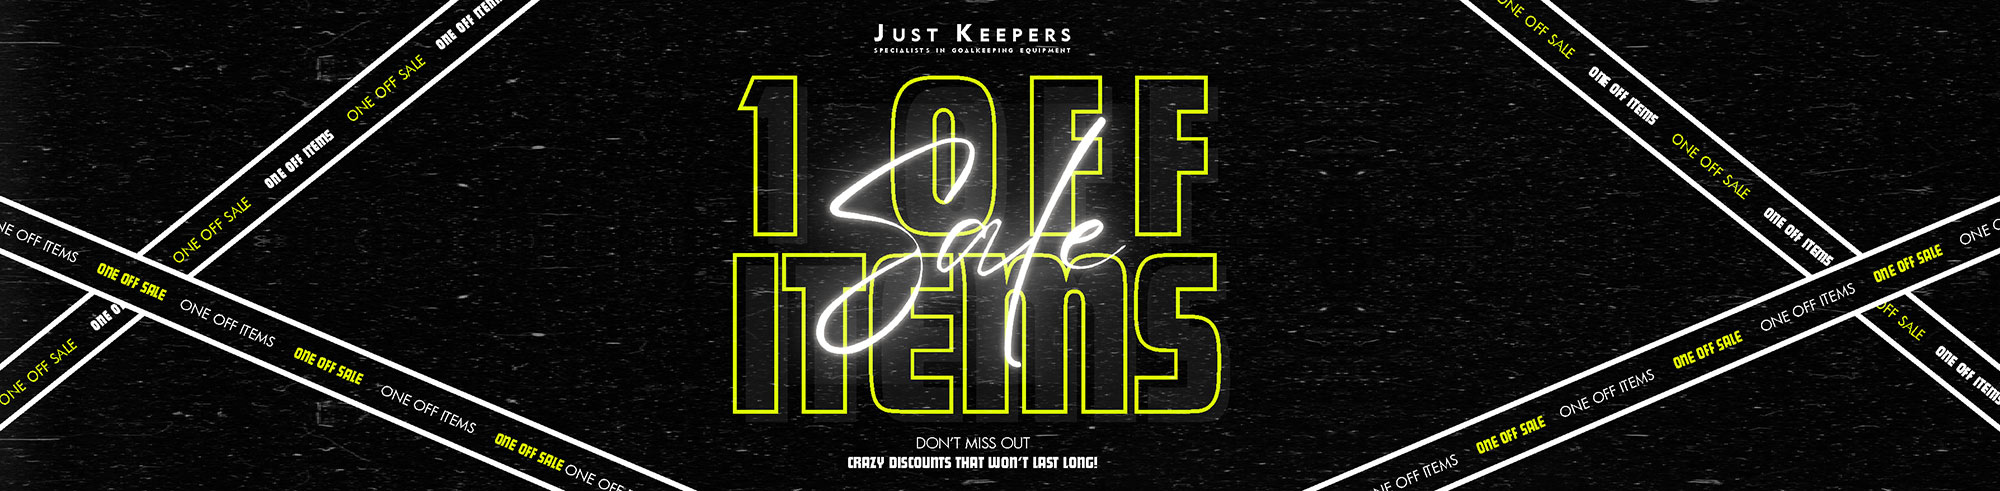 Just Keepers ONE OFF Clearance Sale Huge Discounts